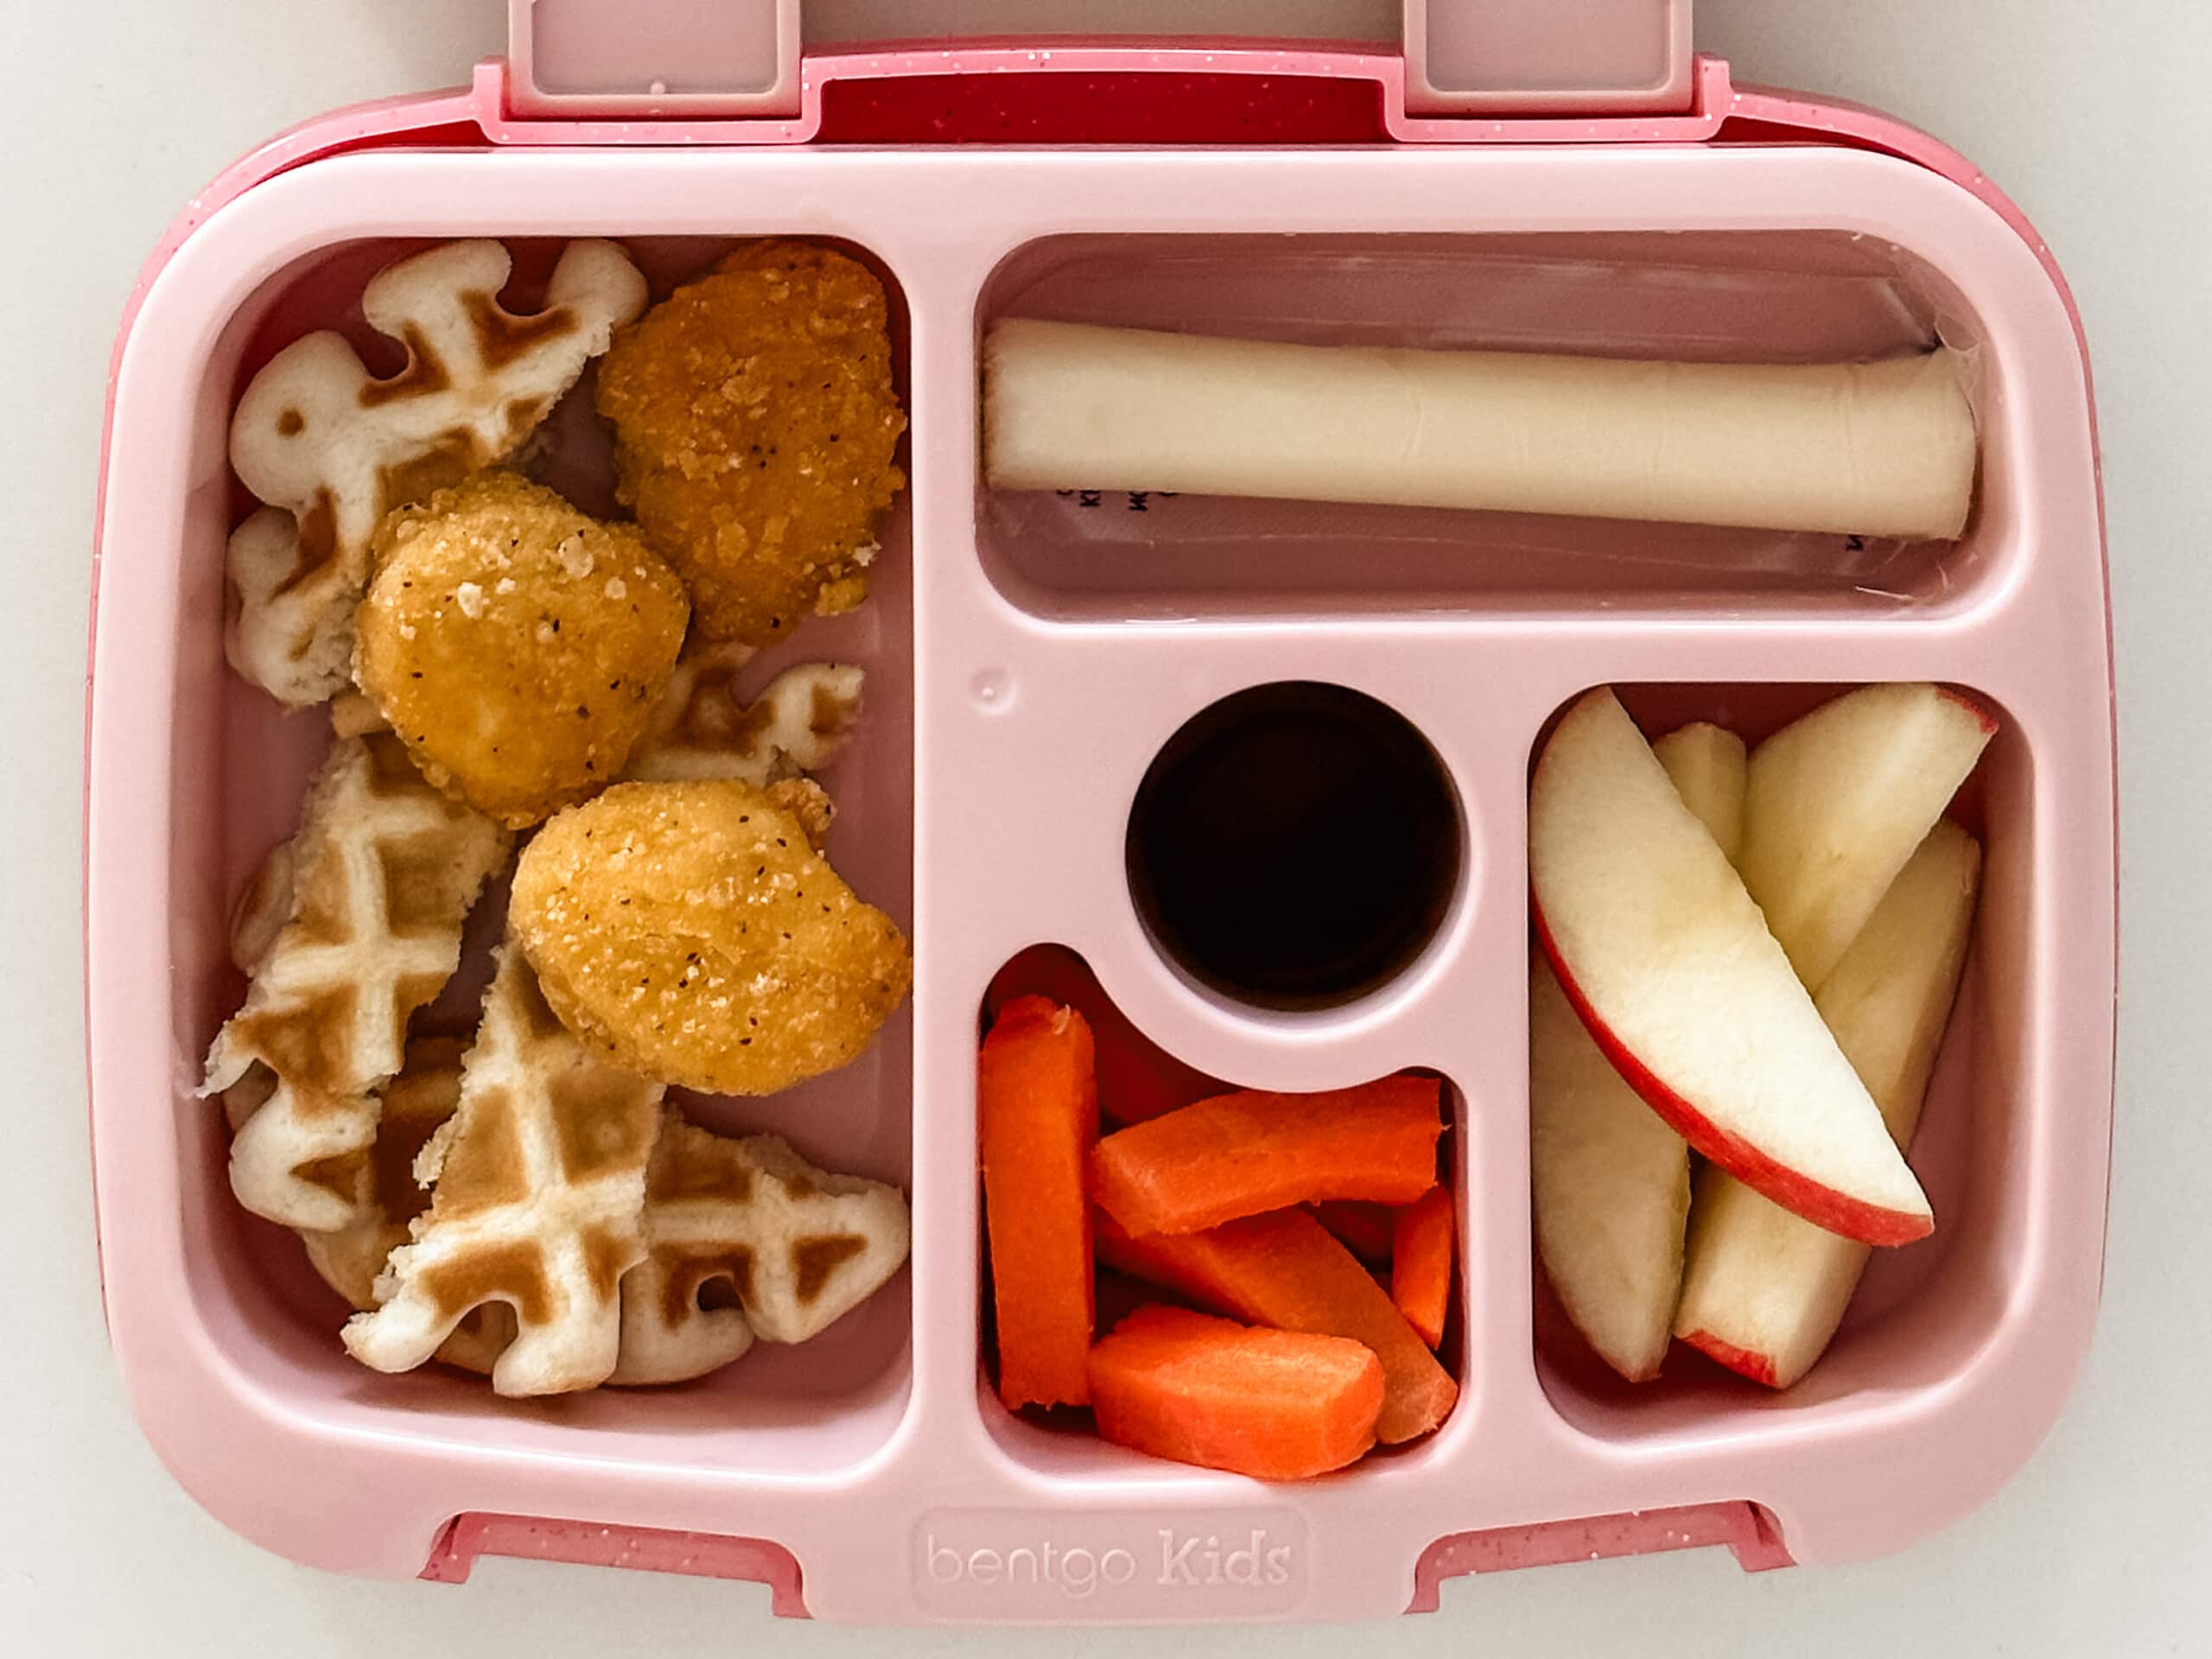 Kid's pink bento box with waffle strips, chicken nuggets, apple slices, carrots, cheese stick, and syrup